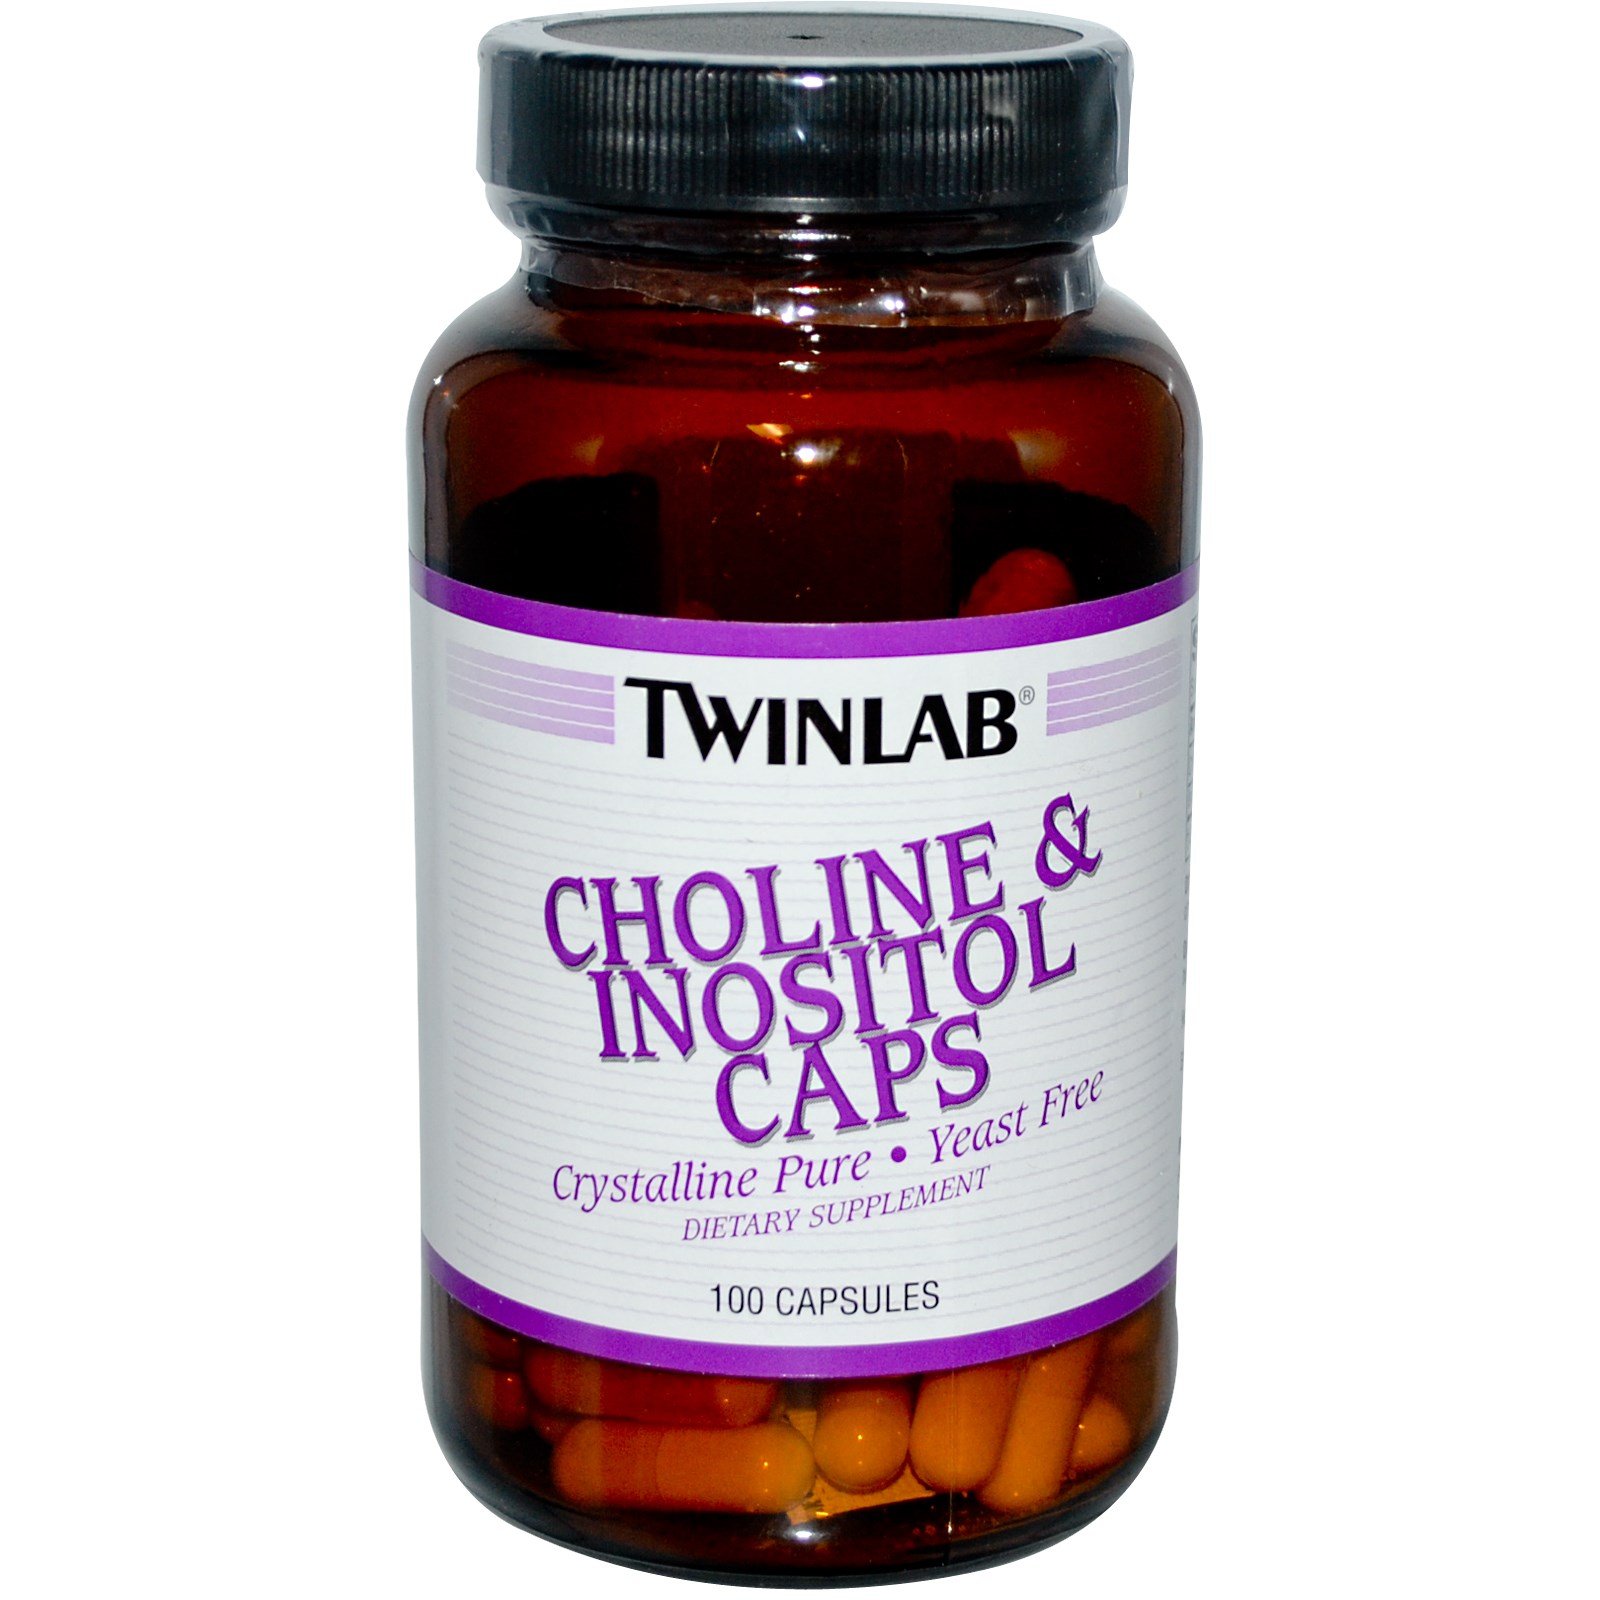 Choline & Inositol, 100 pcs, Twinlab. Special supplements. 